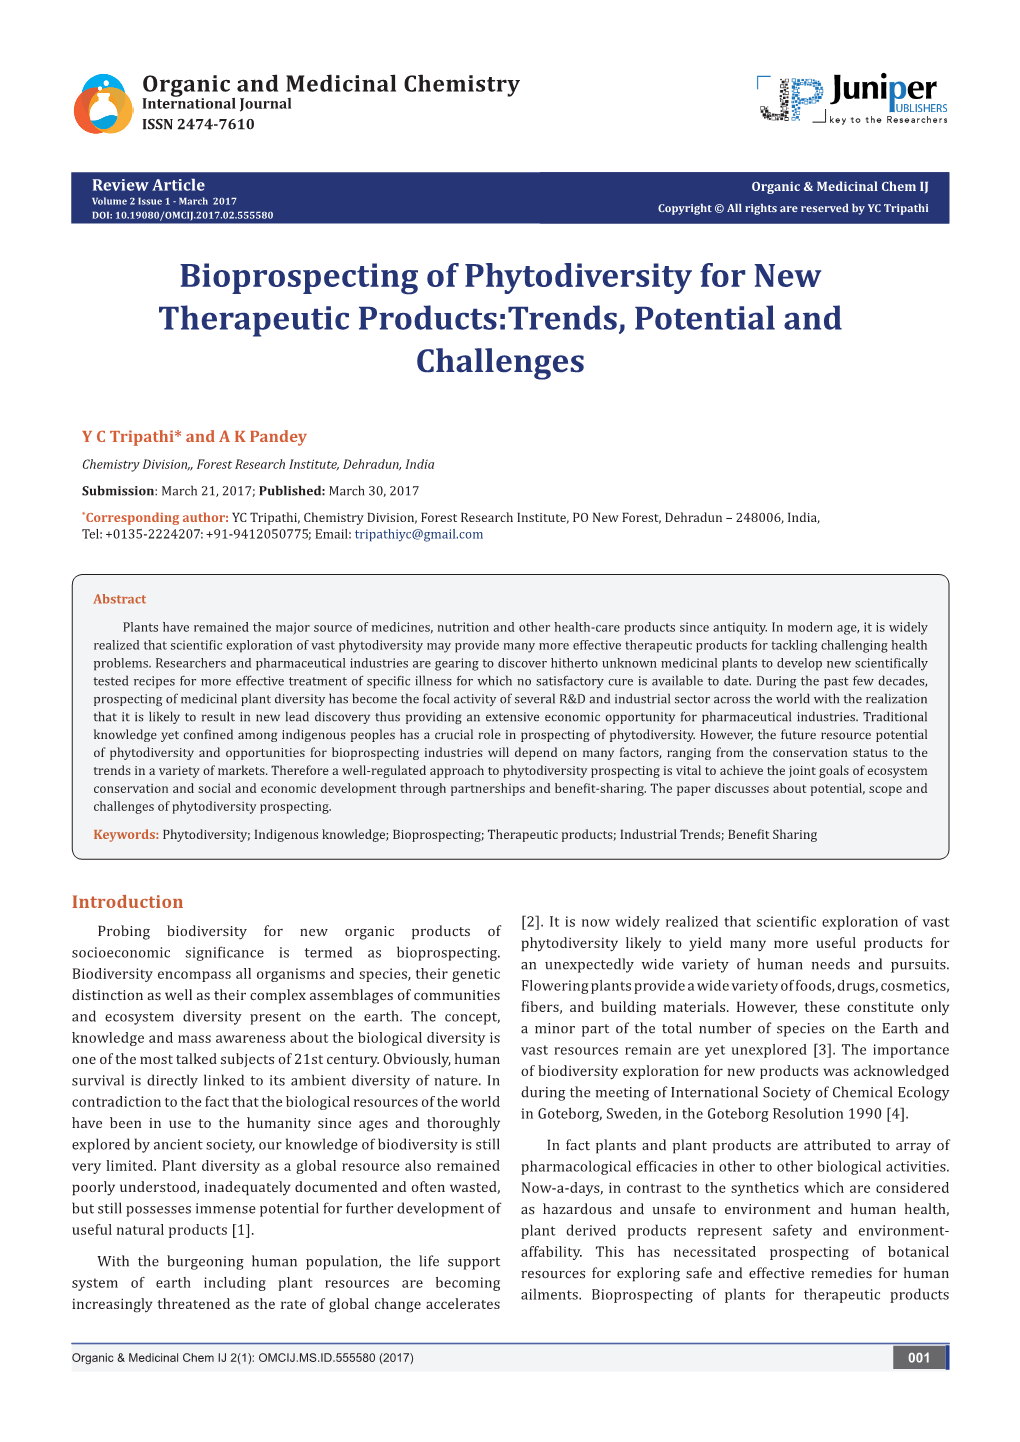 Bioprospecting of Phytodiversity for New Therapeutic Products:Trends, Potential and Challenges